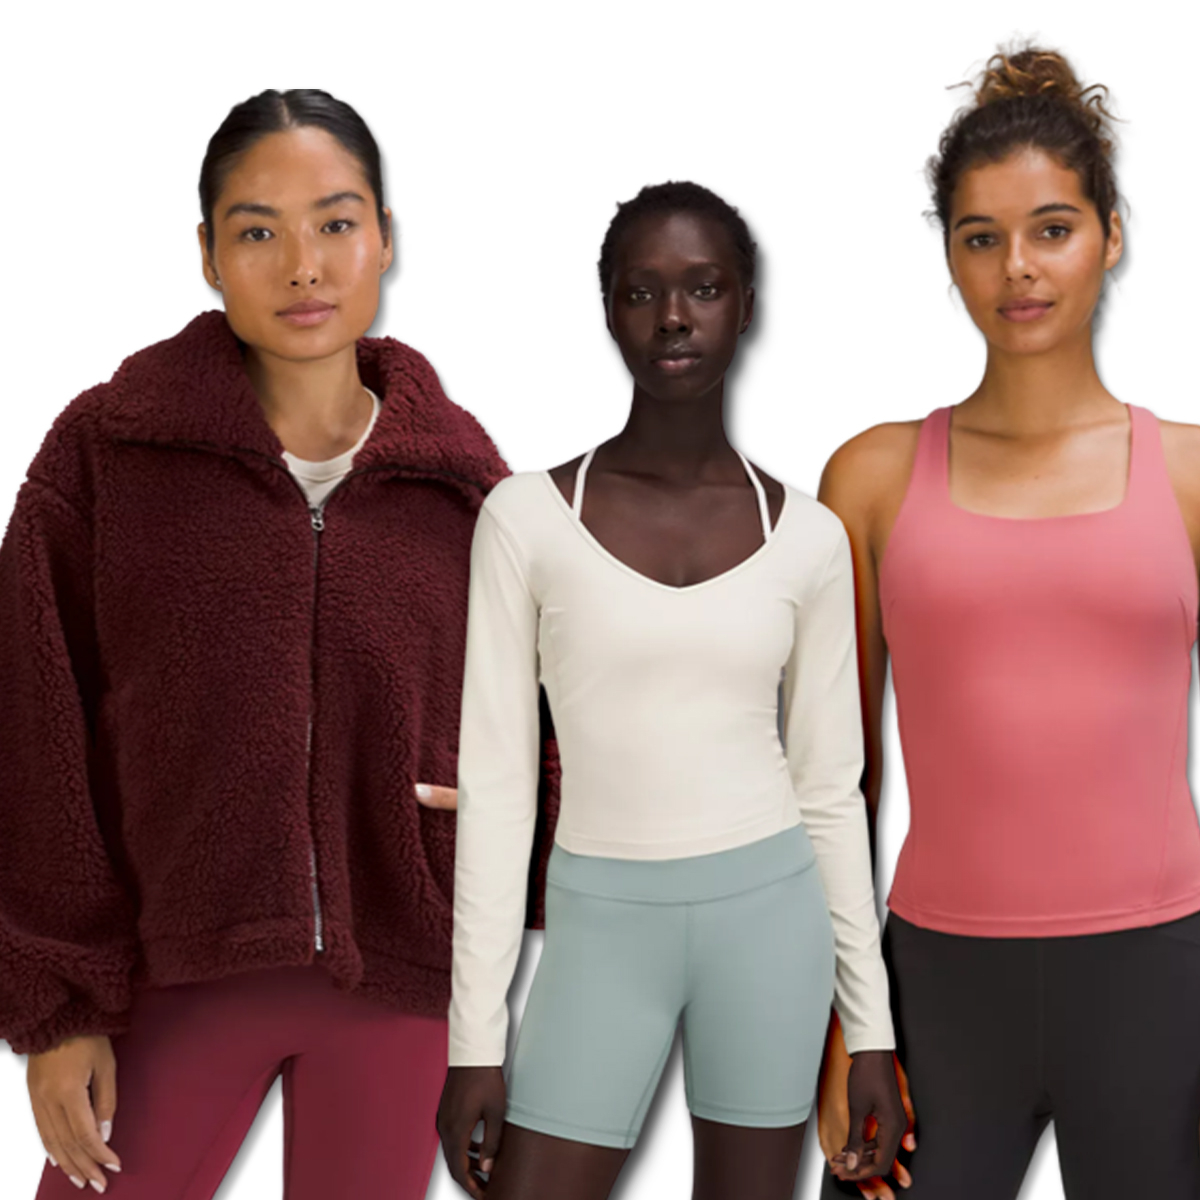 The Lululemon Instill tight is comfortable, supportive and nearly $30 off  from its original price